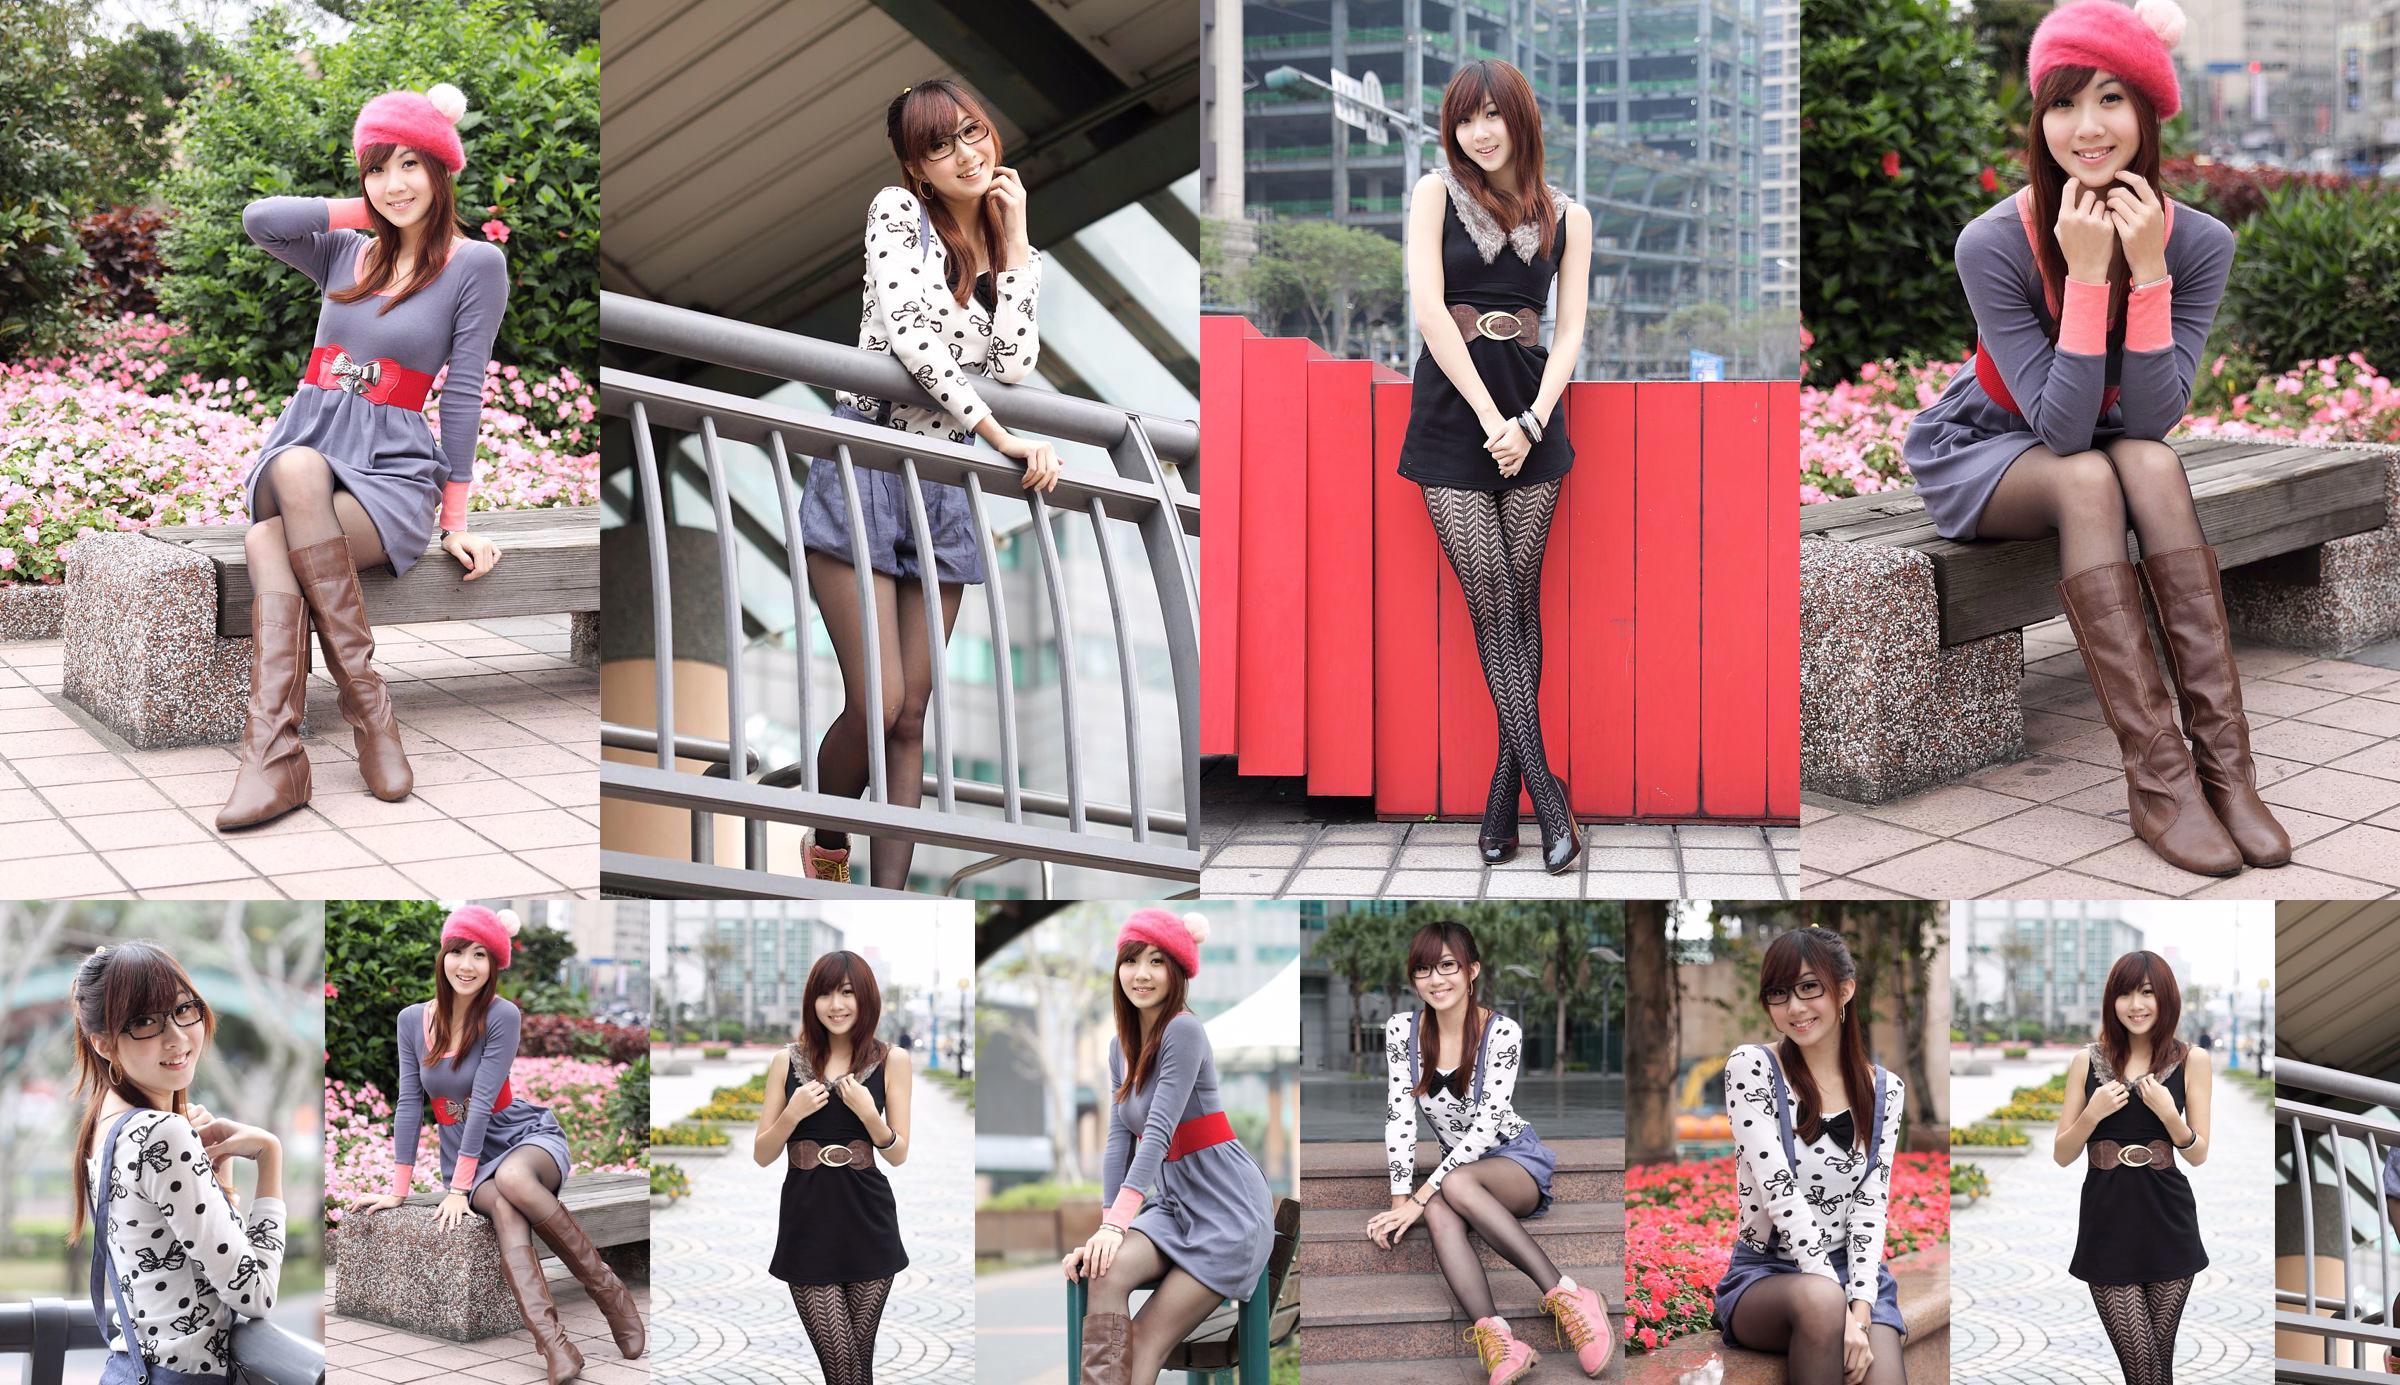 Photo Collection of Taiwan's Pure Beauty Angel "Black Silk Street Photographs" No.278a64 Page 3